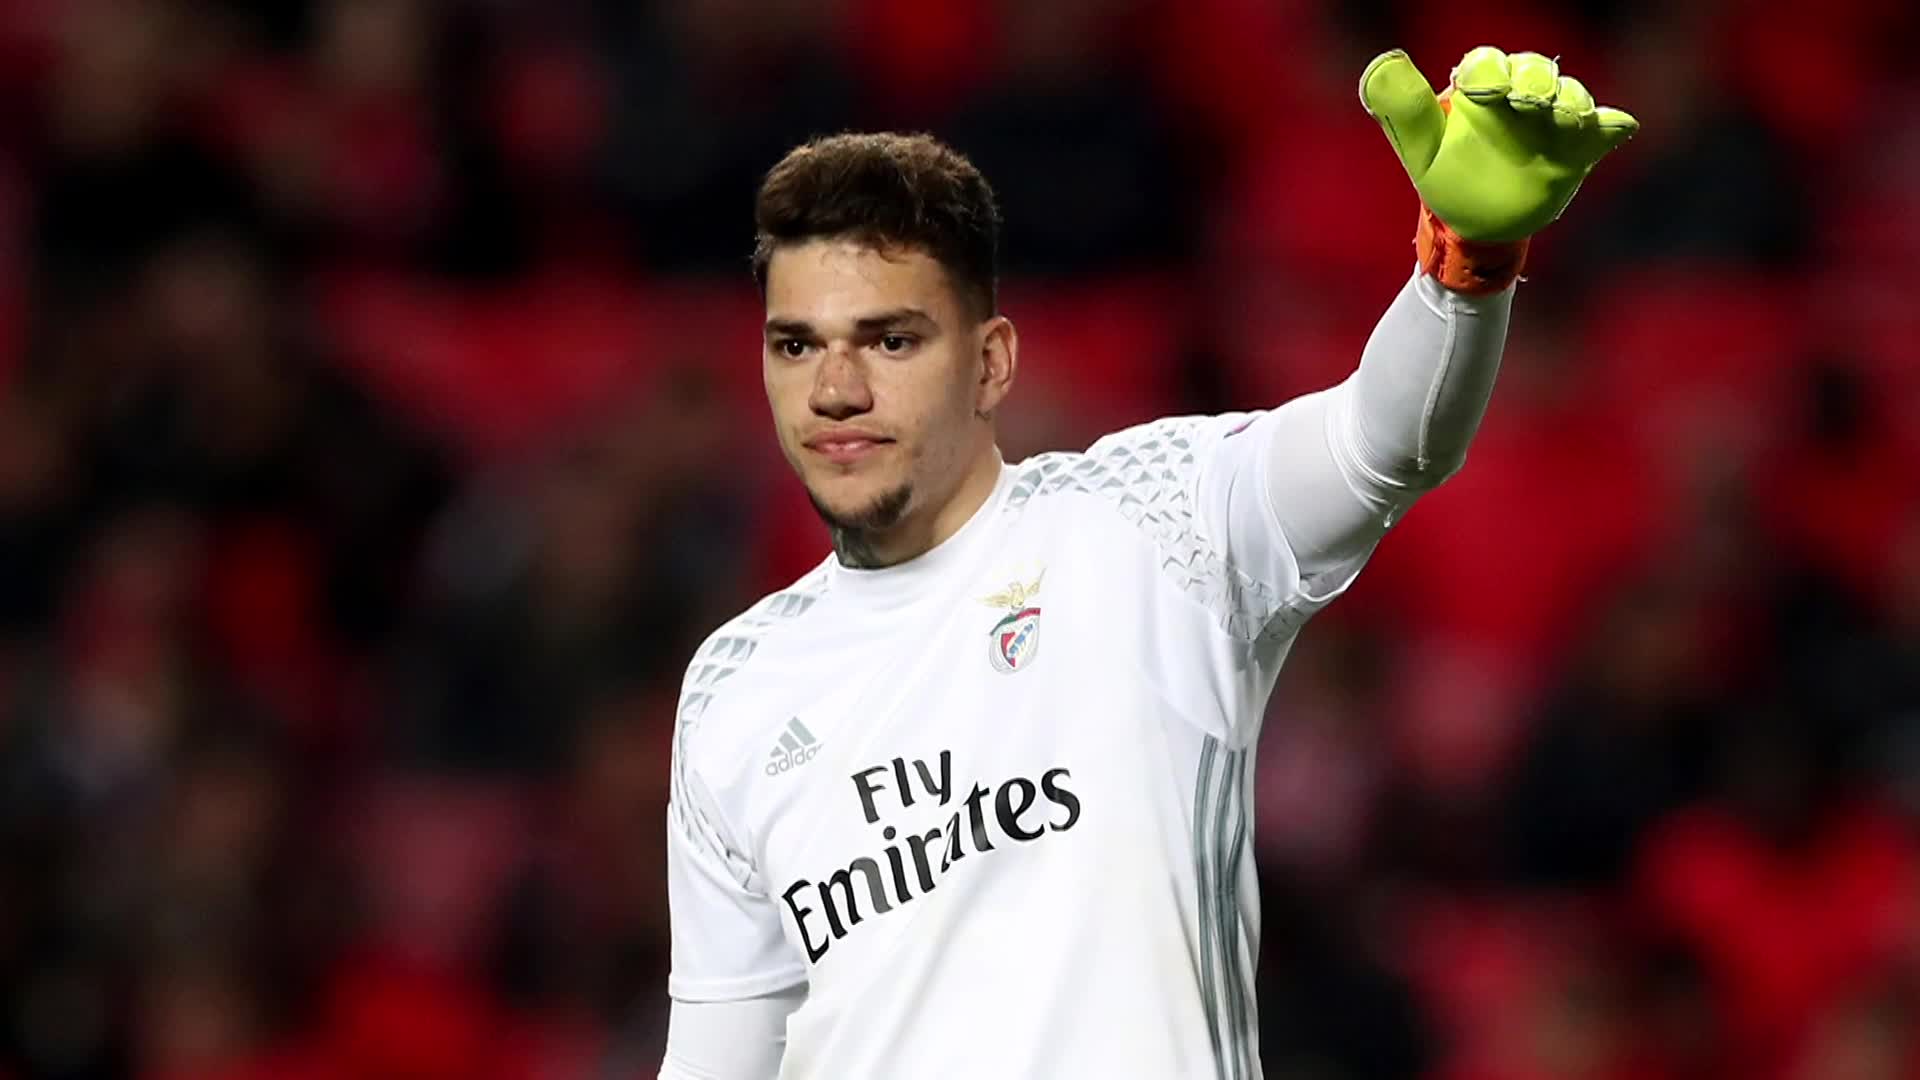 Manchester City in talks to sign Ederson from Benfica for world